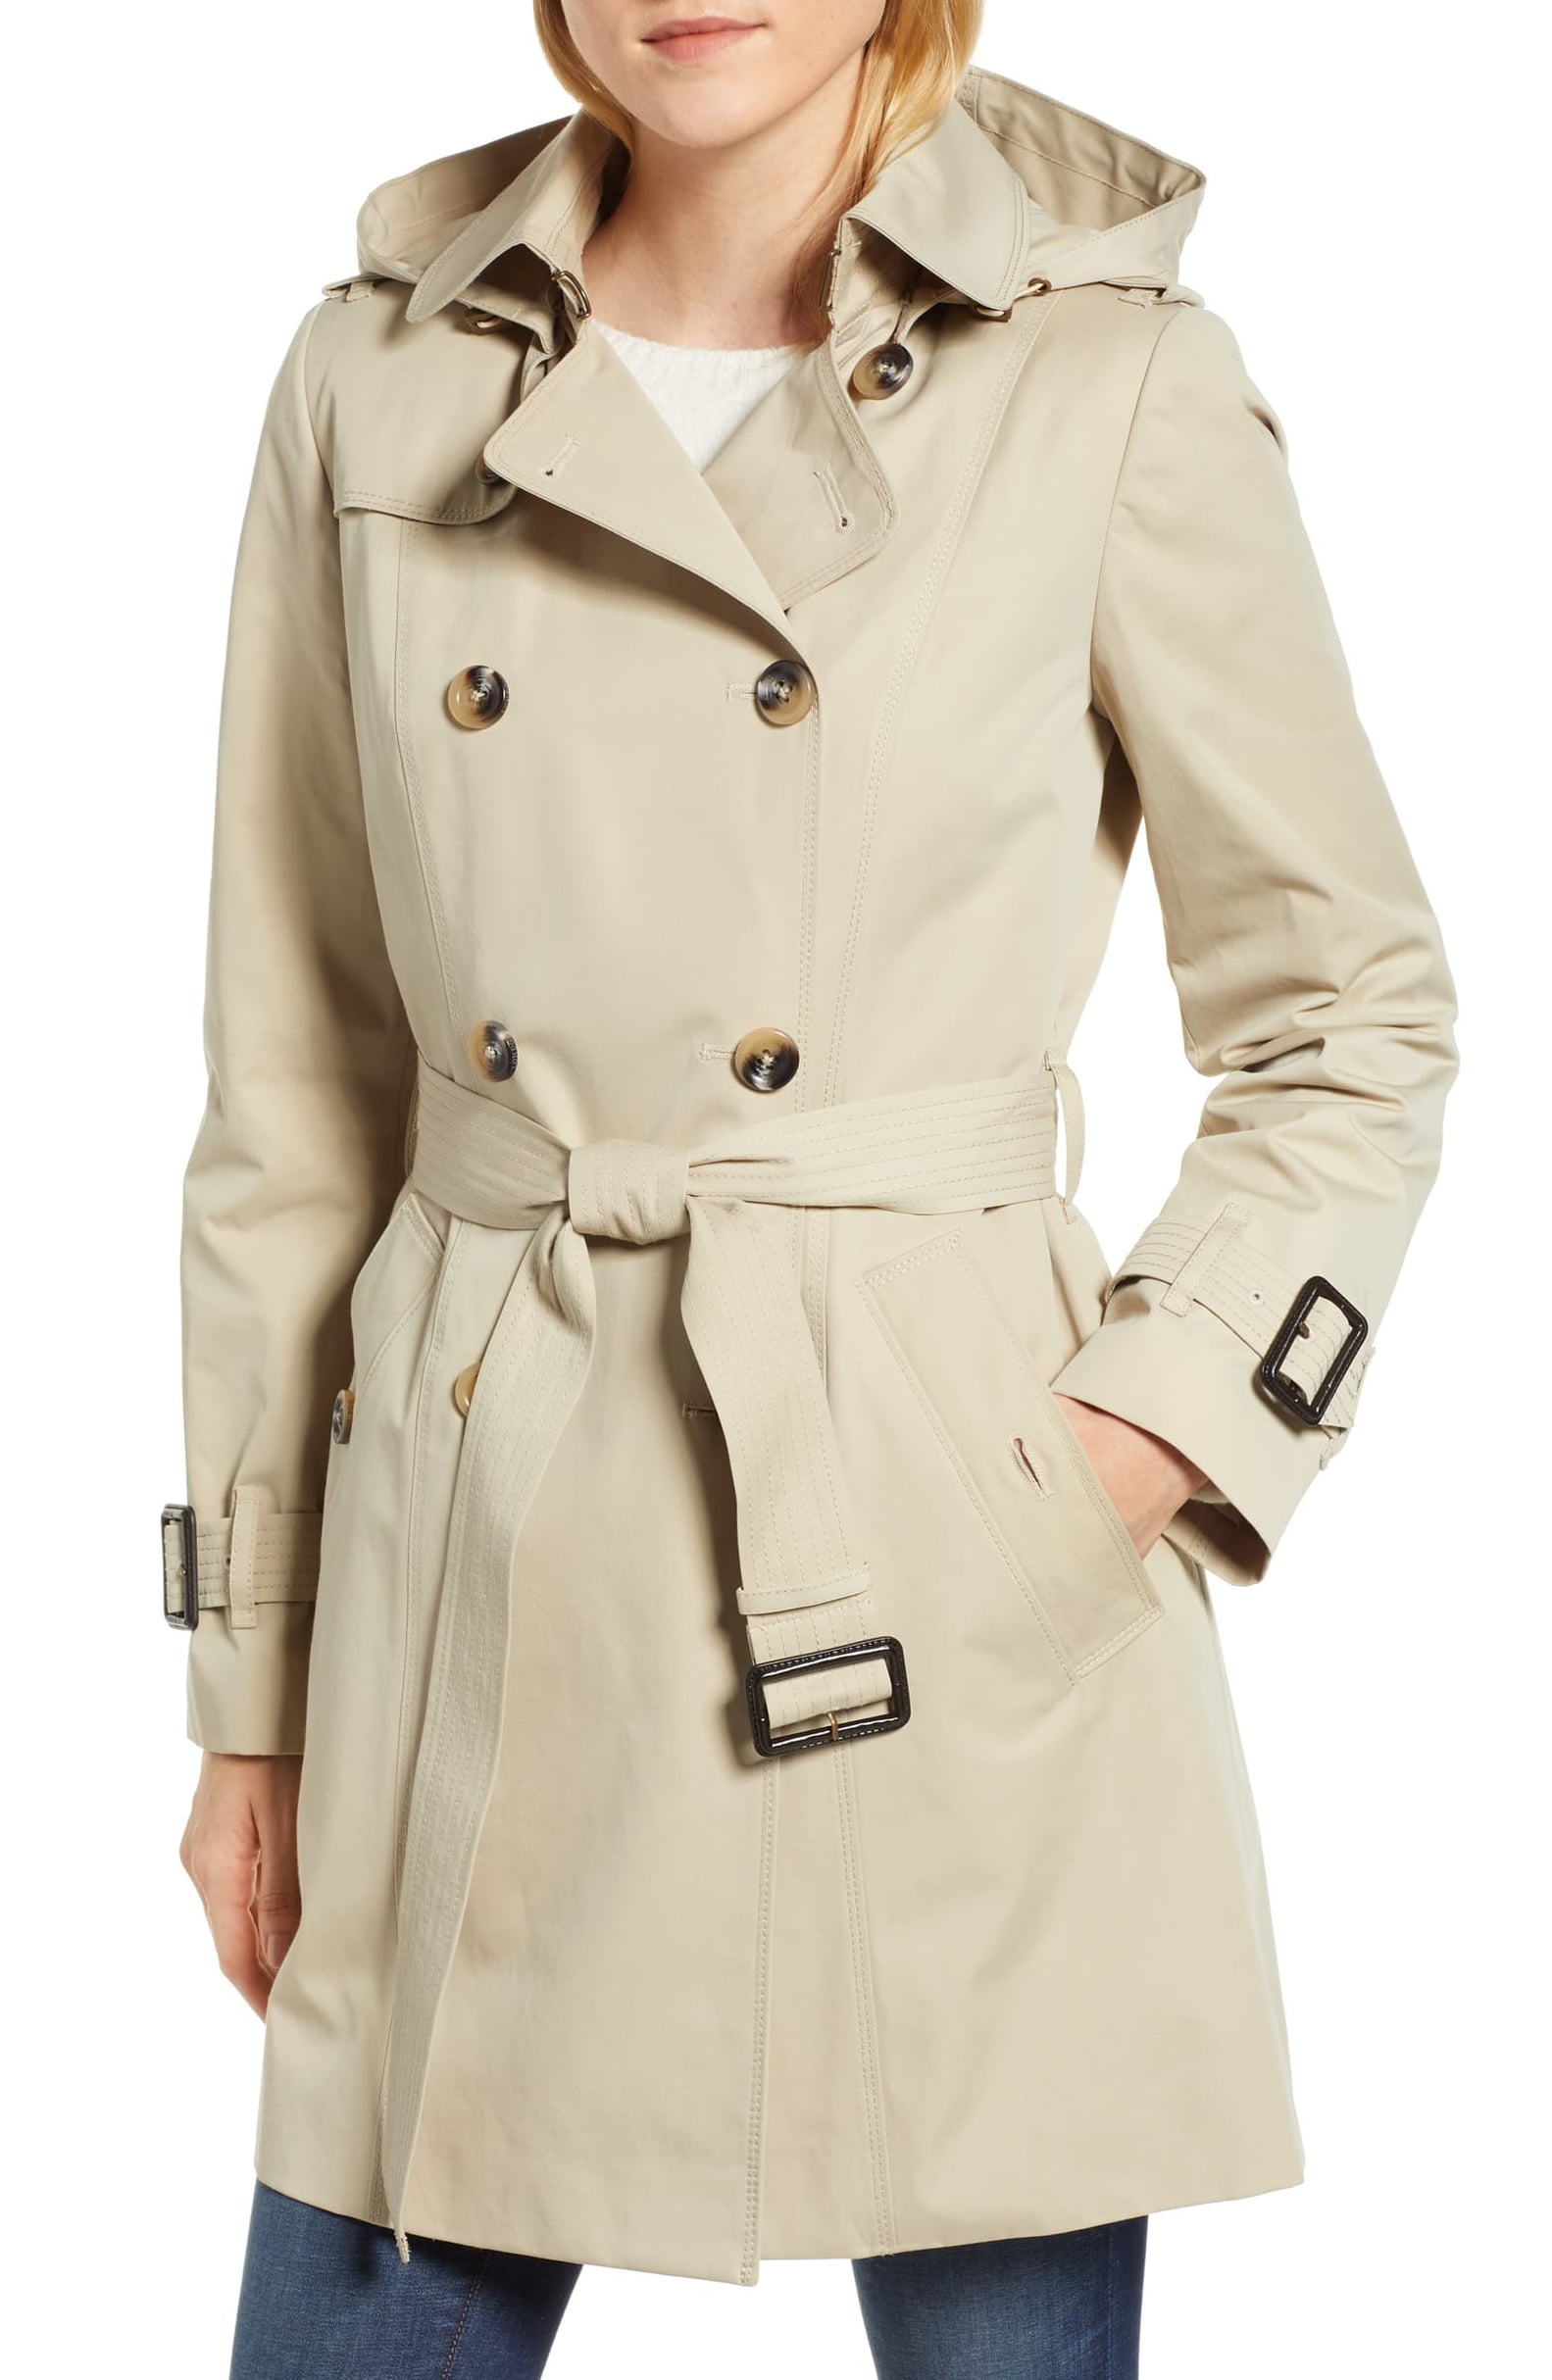 These Are the Best Trench Coats in 2019 | POPSUGAR Fashion